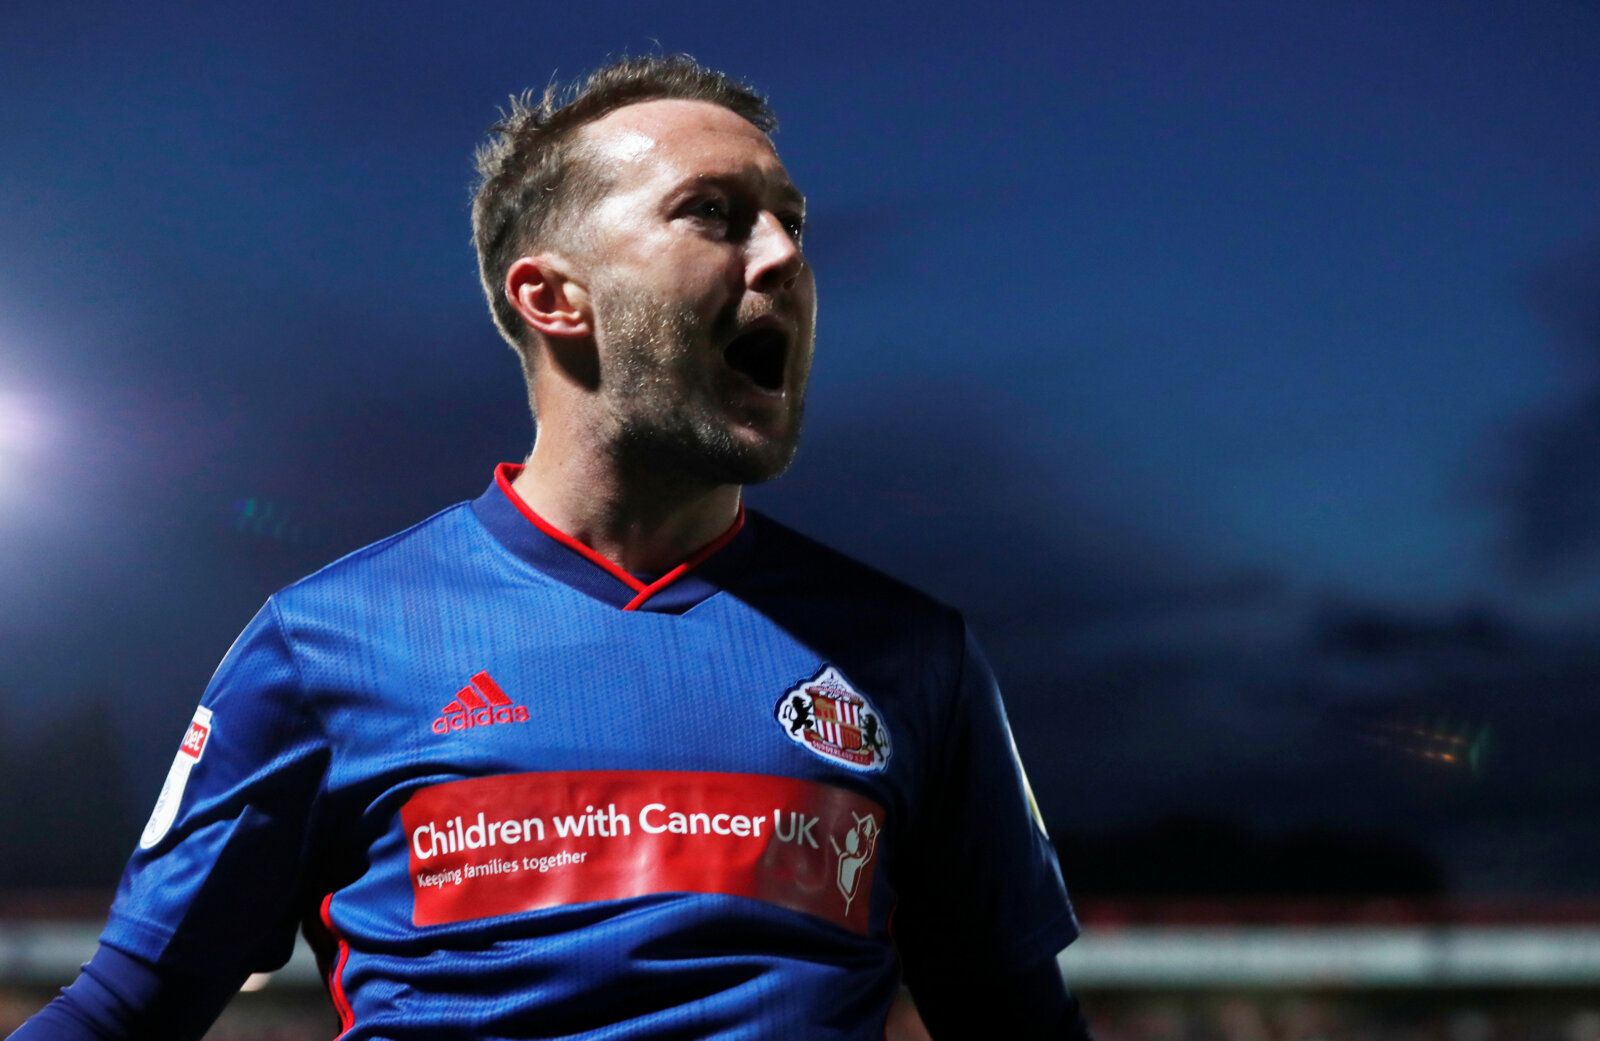 Soccer Football - Carabao Cup First Round - Accrington Stanley v Sunderland - Wham Stadium, Accrington, Britain - August 13, 2019   Sunderland's Aiden McGeady celebrates scoring their third goal       Action Images/Lee Smith    EDITORIAL USE ONLY. No use with unauthorized audio, video, data, fixture lists, club/league logos or 